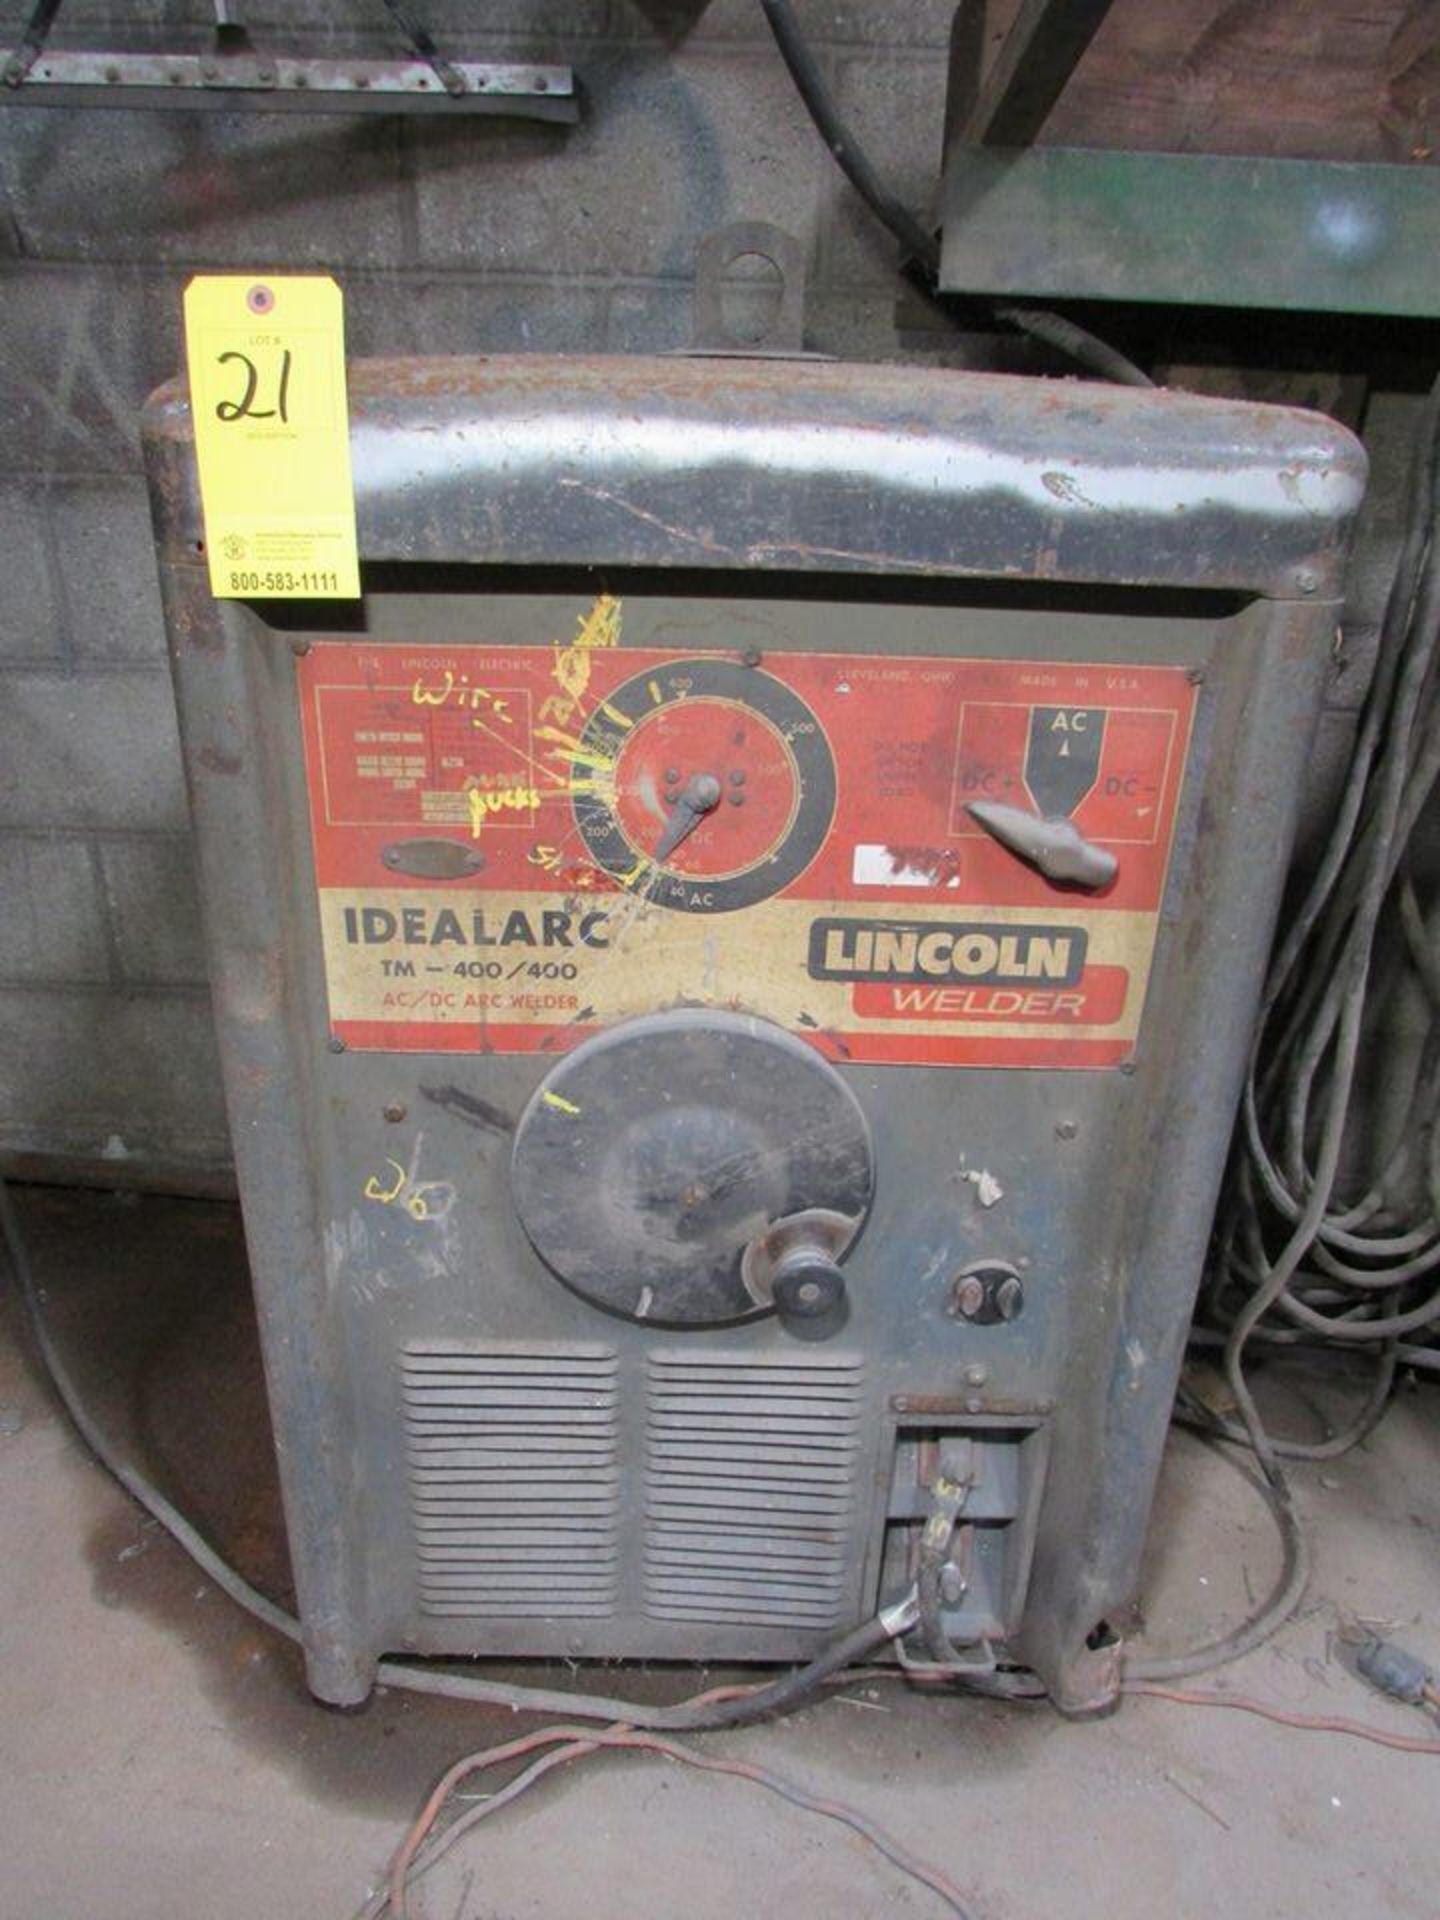 Lincoln Electric Idealarc 400-400 AC/DC Arc Welding Power Source, 400A 40V 60% Duty Cycle 76 Max OCV - Image 2 of 6